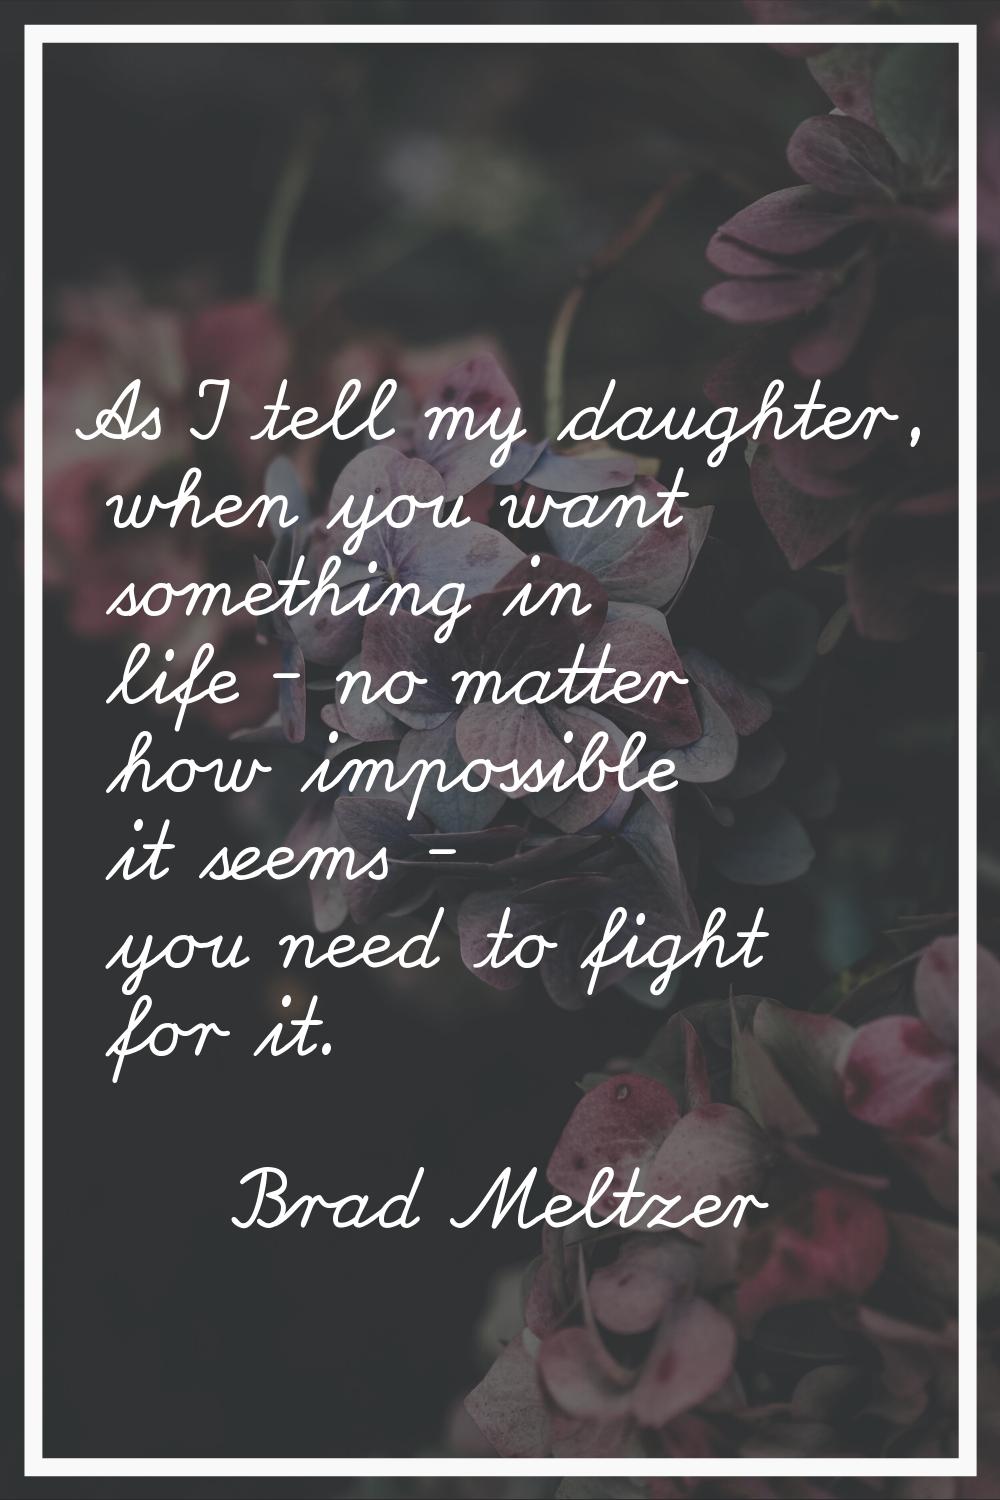 As I tell my daughter, when you want something in life - no matter how impossible it seems - you ne